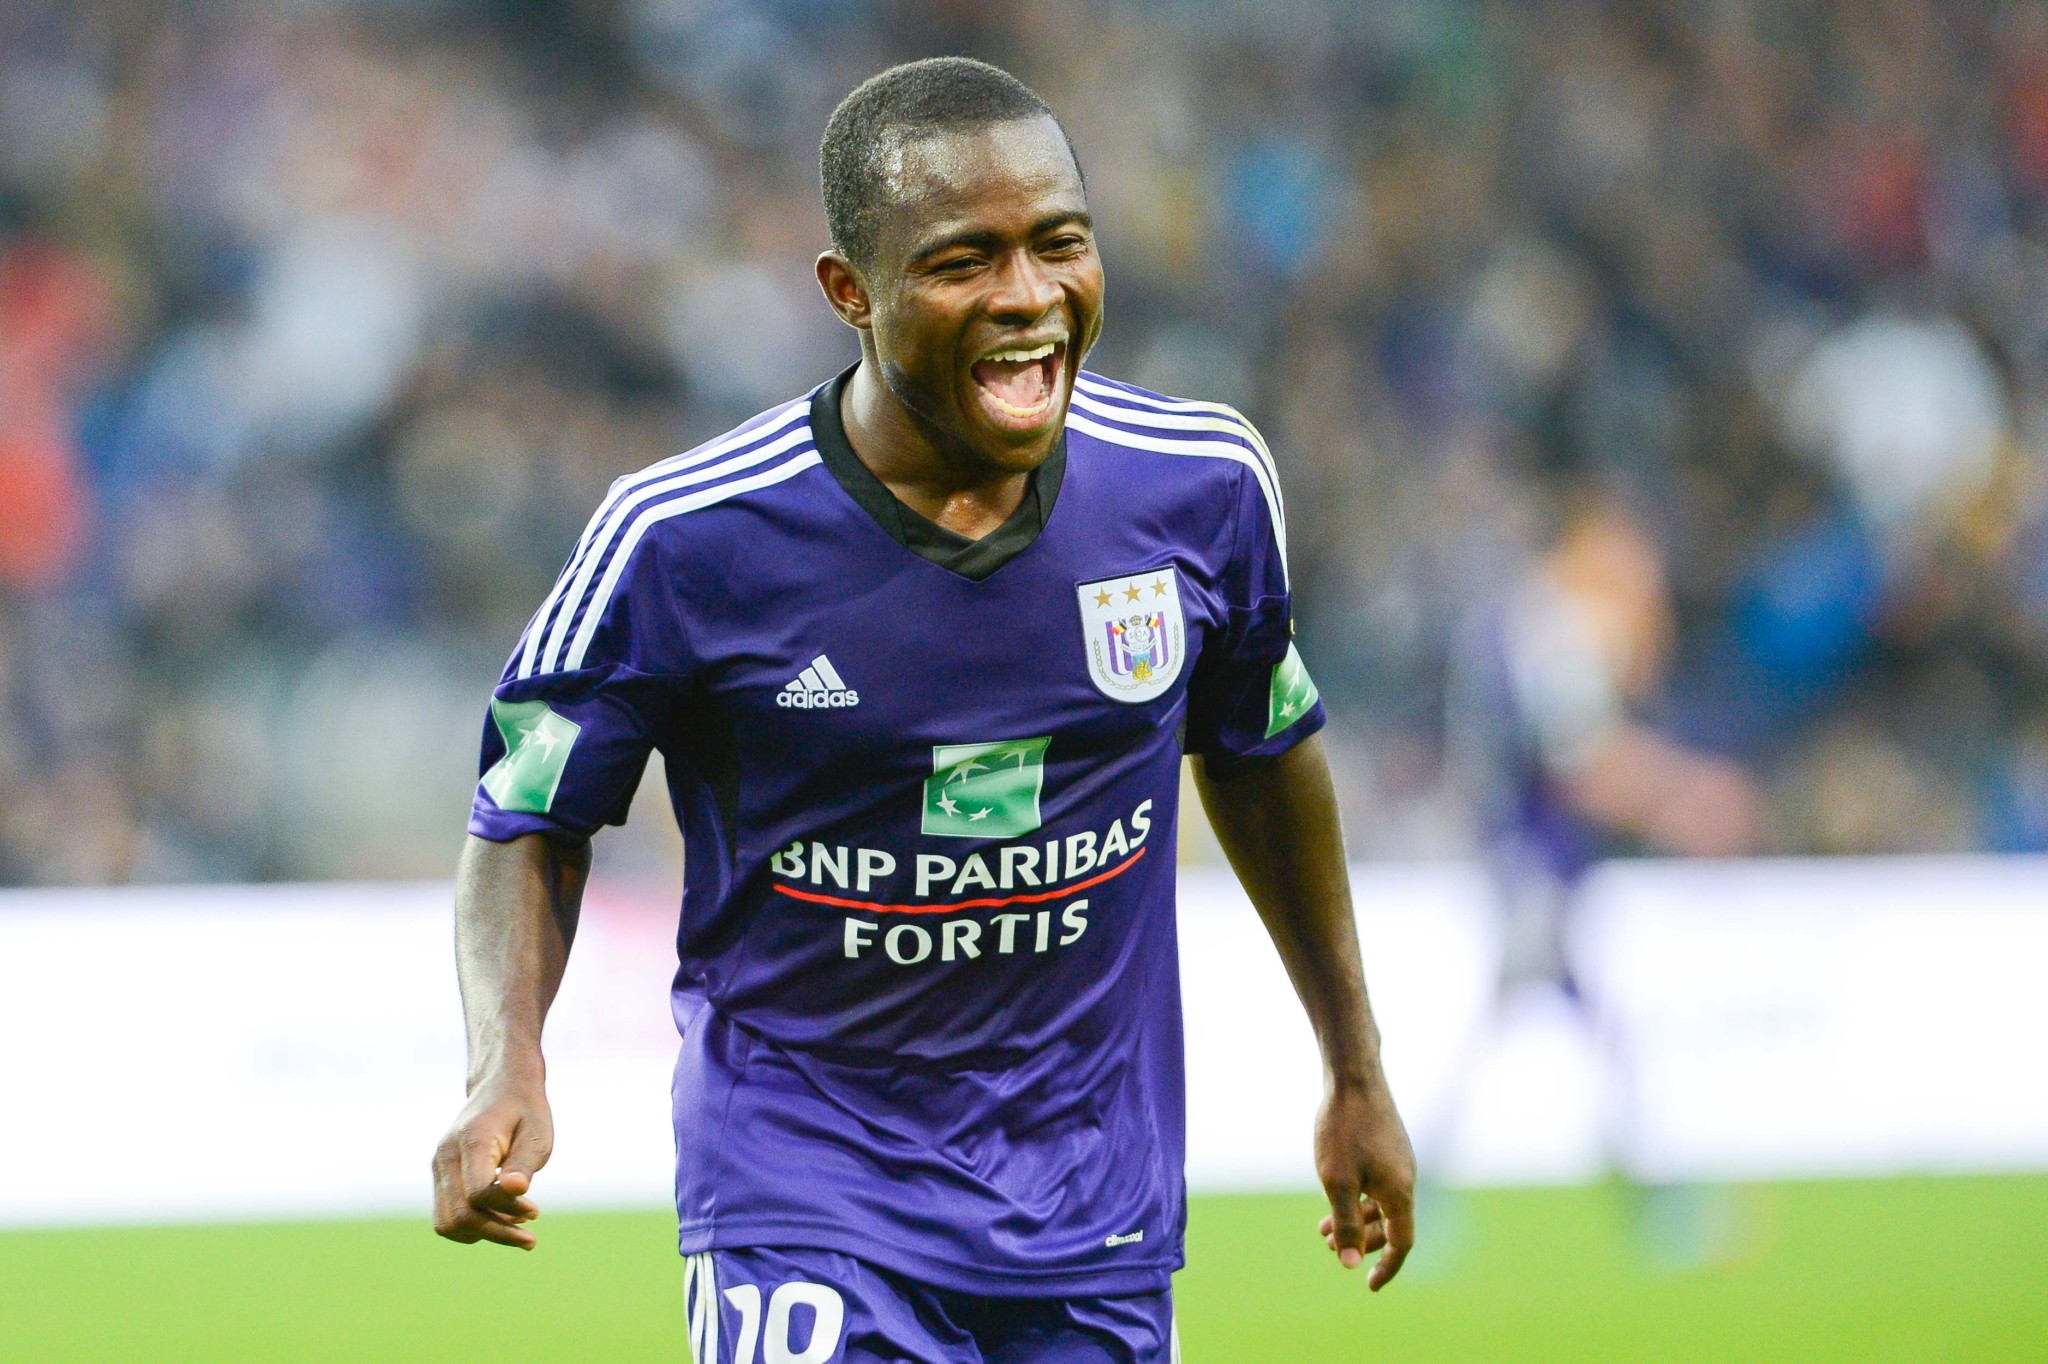 Frank Acheampong scores for Anderlecht in pre-season win